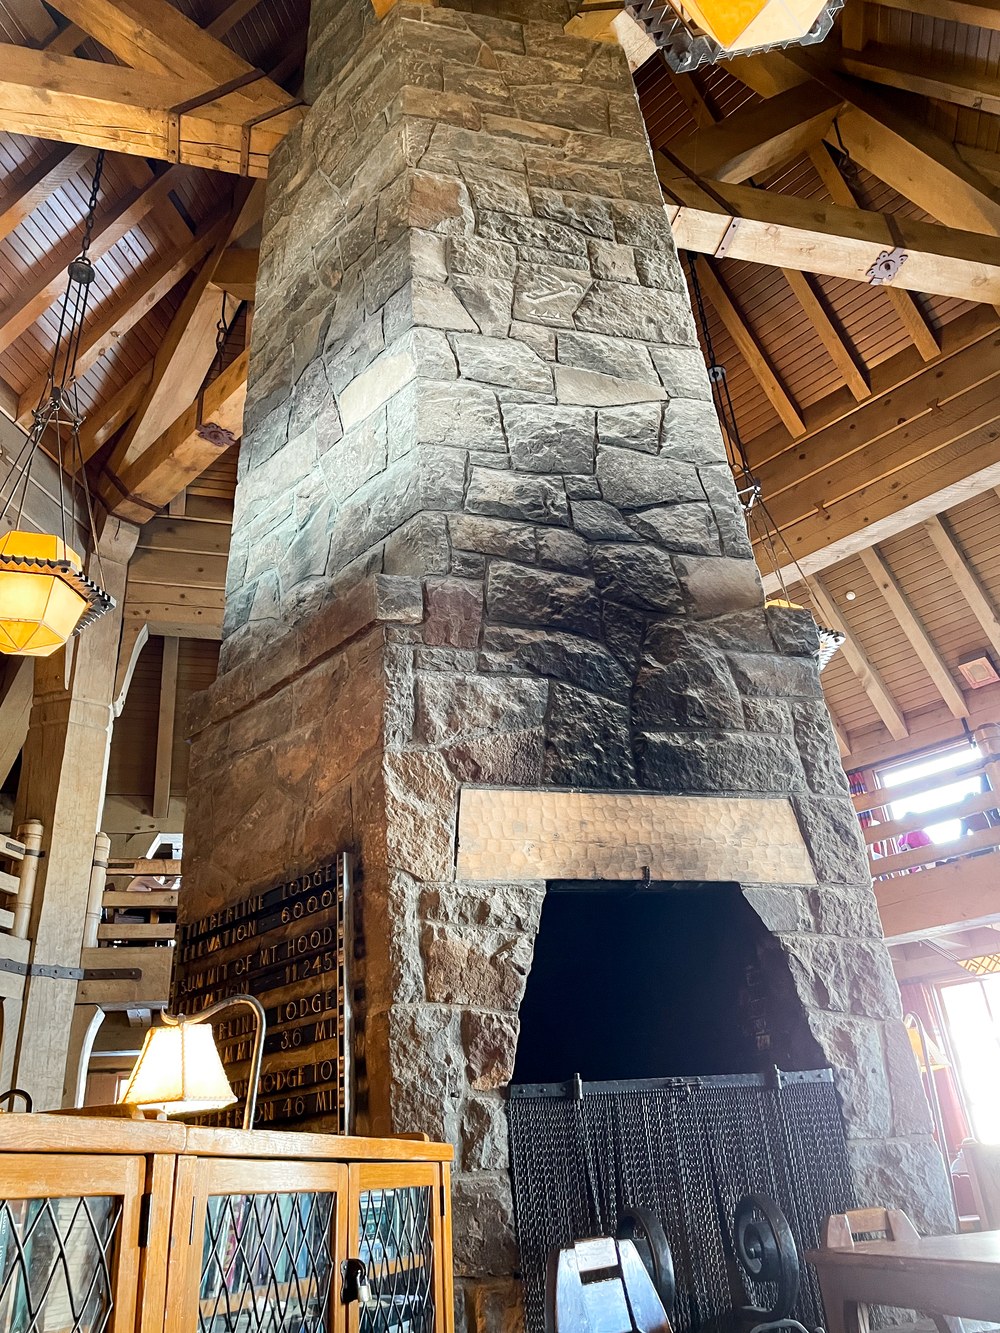 Interior Fireplace at Timberline Lodge